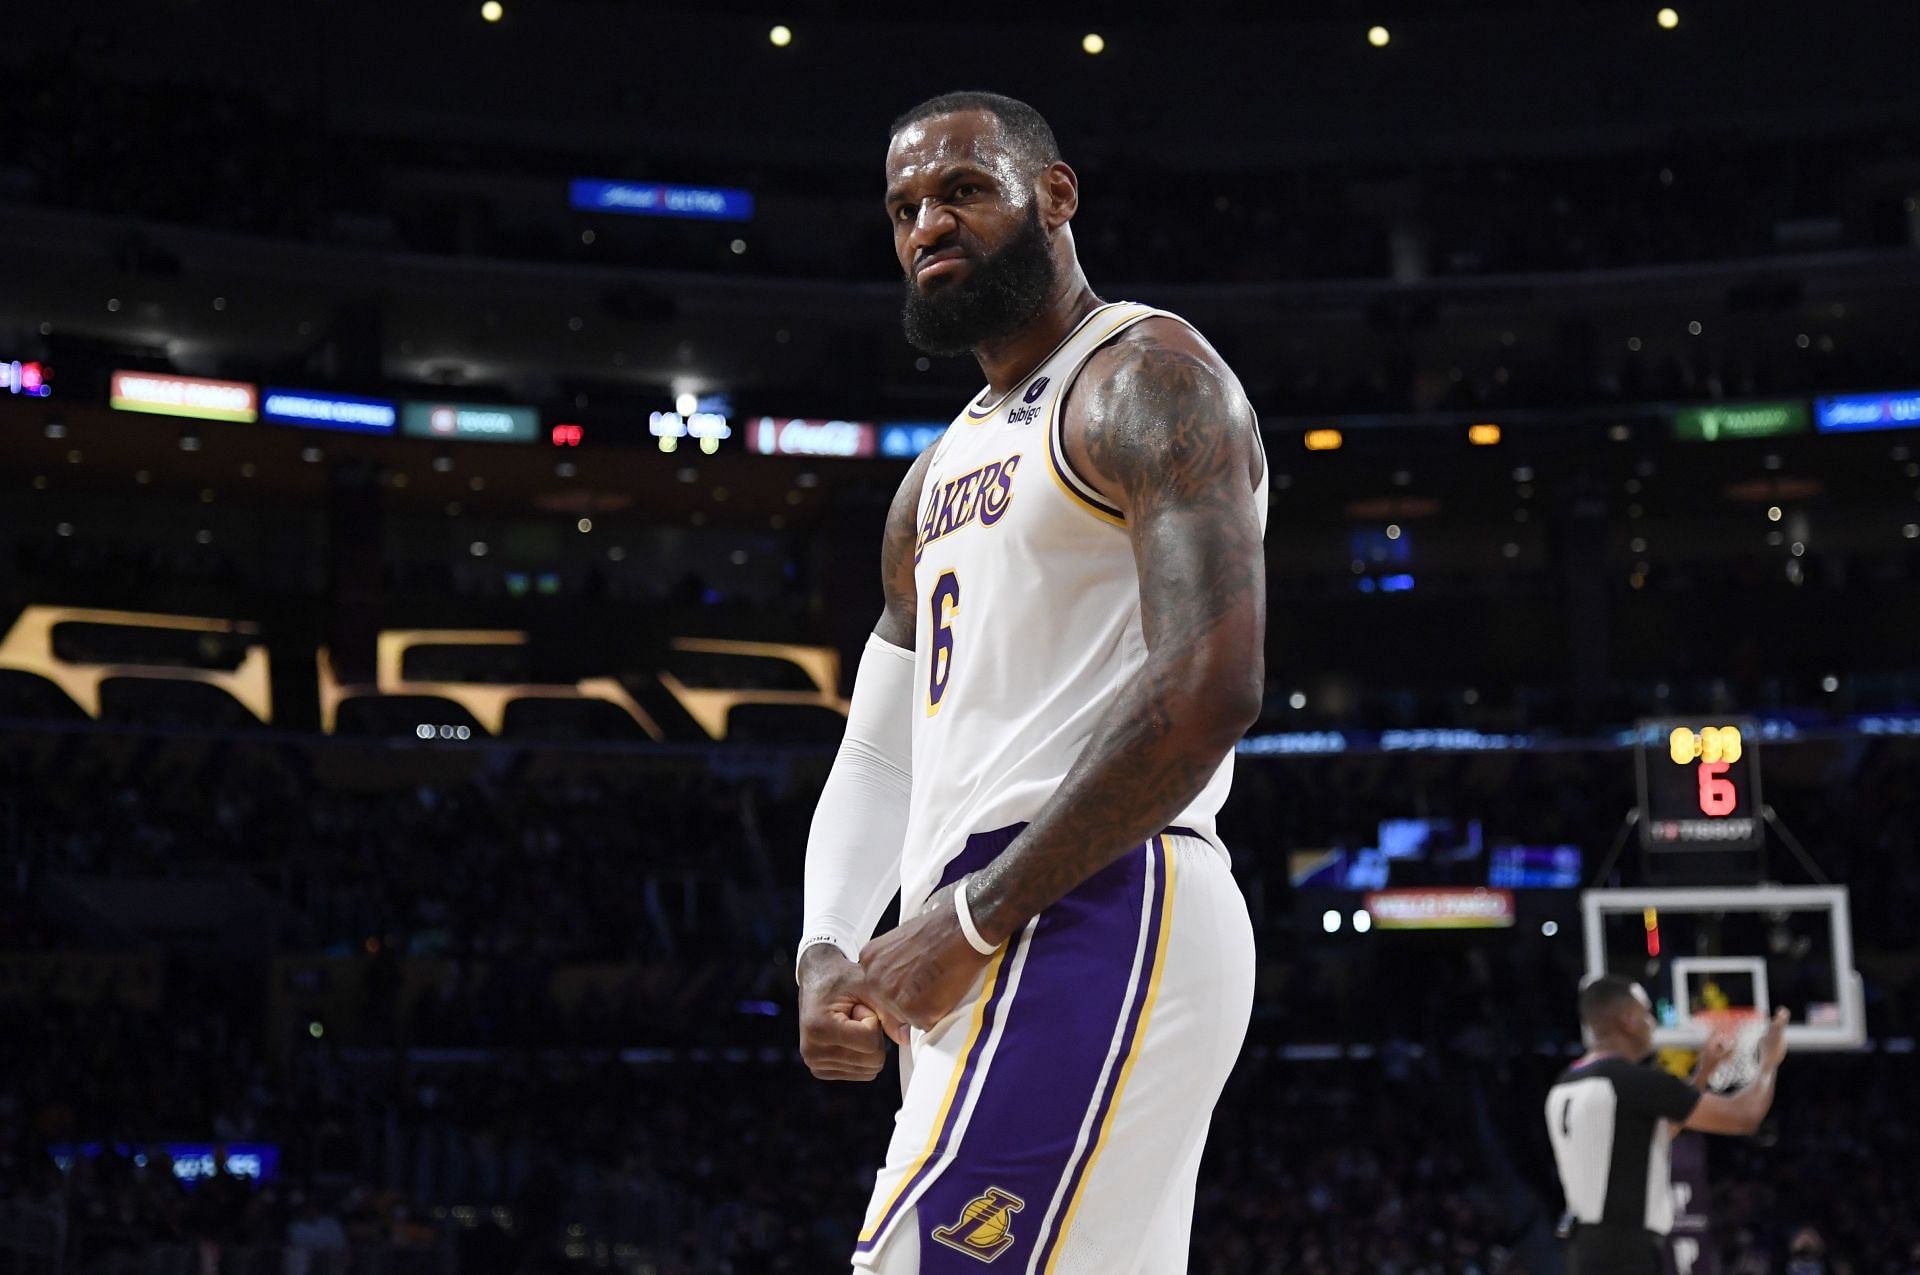 LeBron James #6 of the Los Angeles Lakers reacts after scoring a basket and drawing a foul against Orlando Magic during the first half at Staples Center on December 12, 2021 in Los Angeles, California.